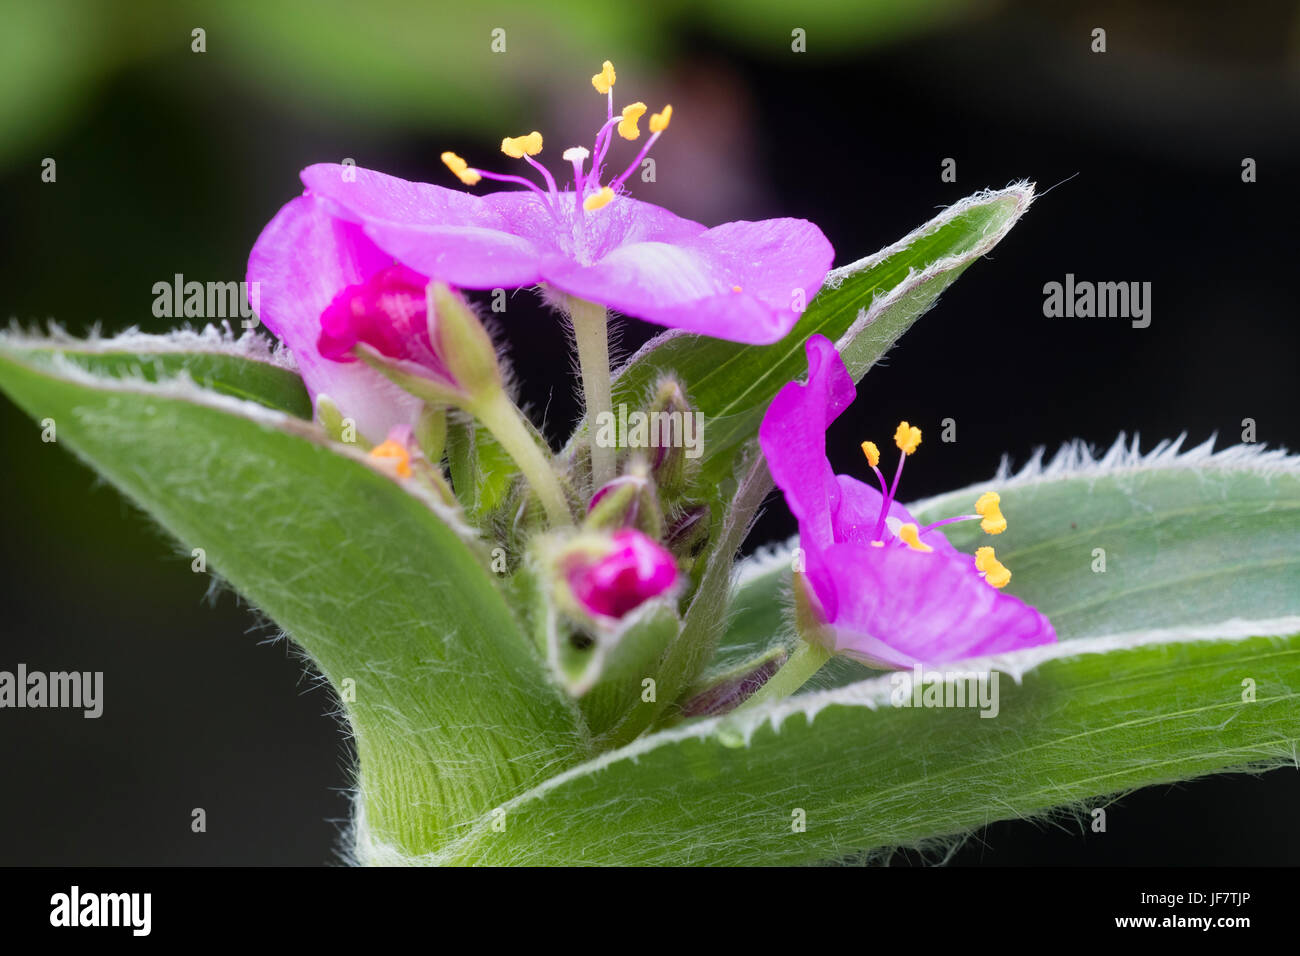 Purple summer flowers of the glossy leaved perennial, Tradescantia crassifolia Stock Photo